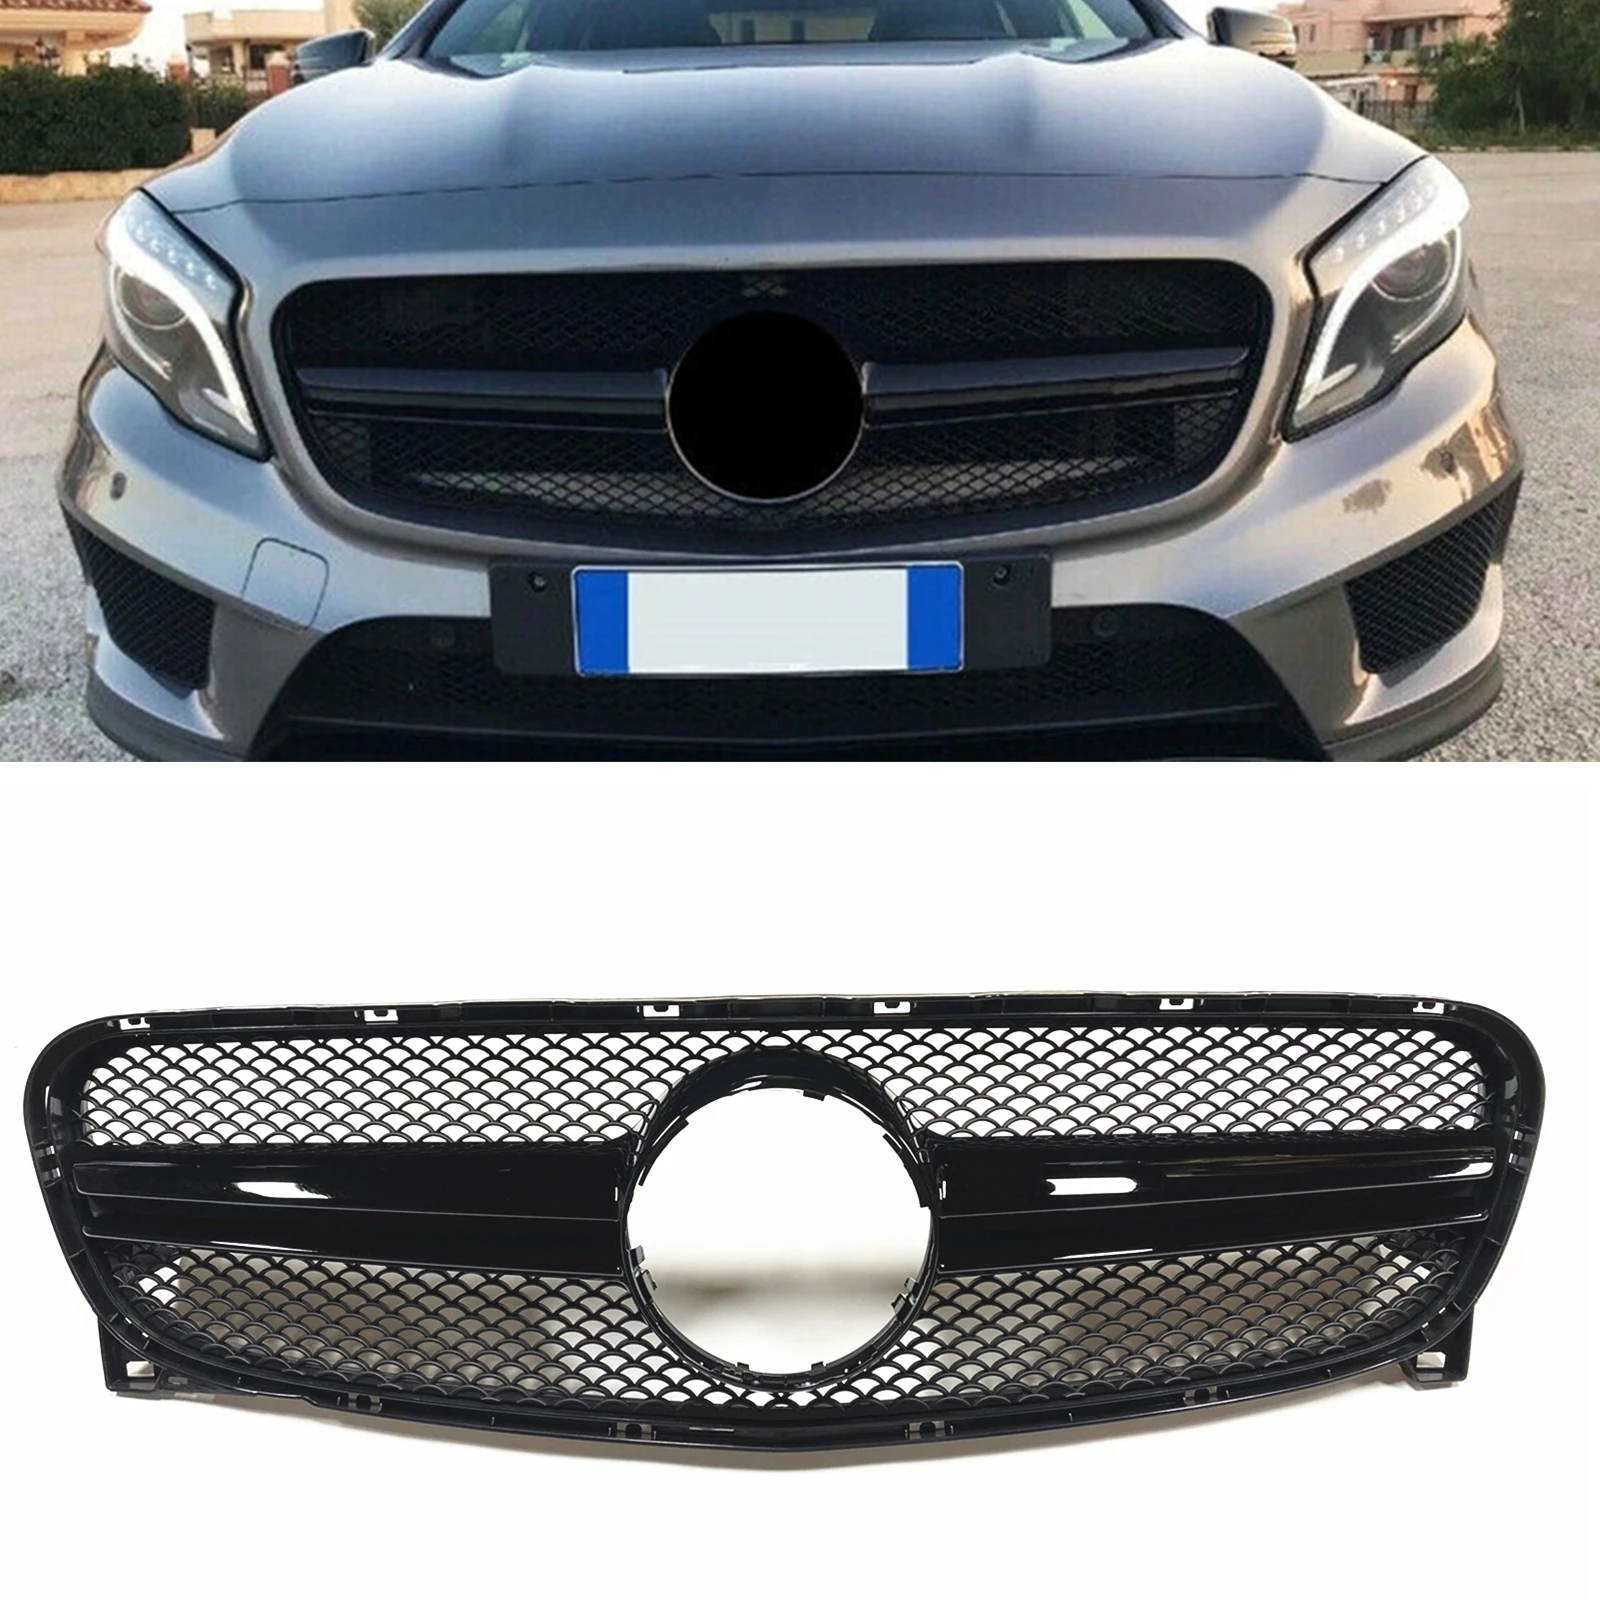 

Car Front Grille Grill Upper Replacement Bumper Hood Mesh For Mercedes Benz GLA X156 GLA45 GLA250 GLA200 2014-2016